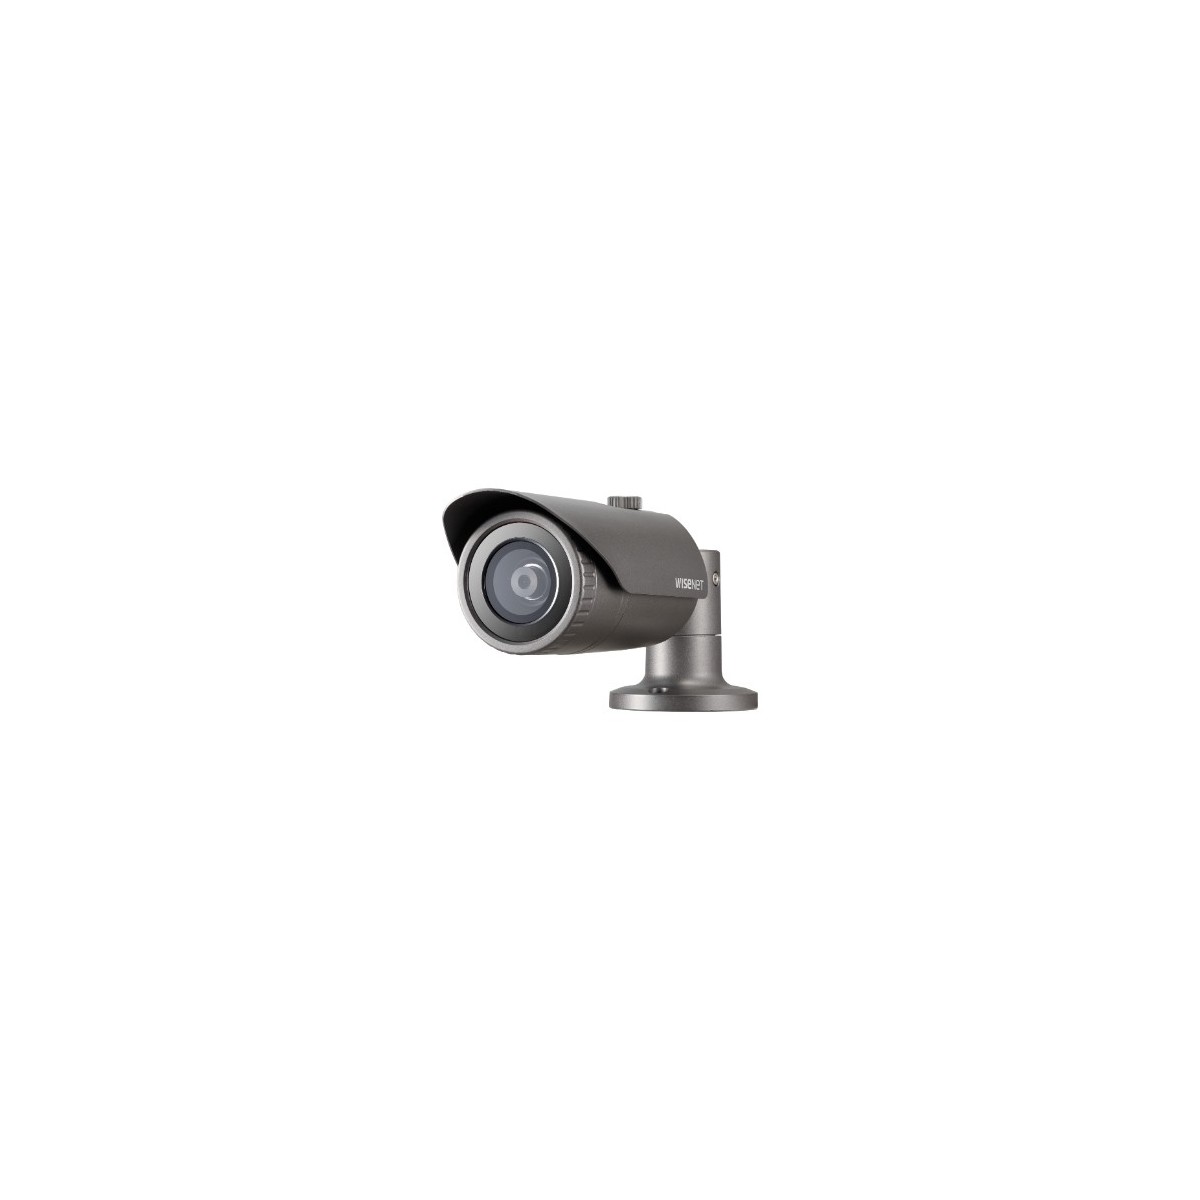 Hanwha Techwin Hanwha QNO-6022R - IP security camera - Outdoor - Wired - Covert - Ceiling/wall - Grey